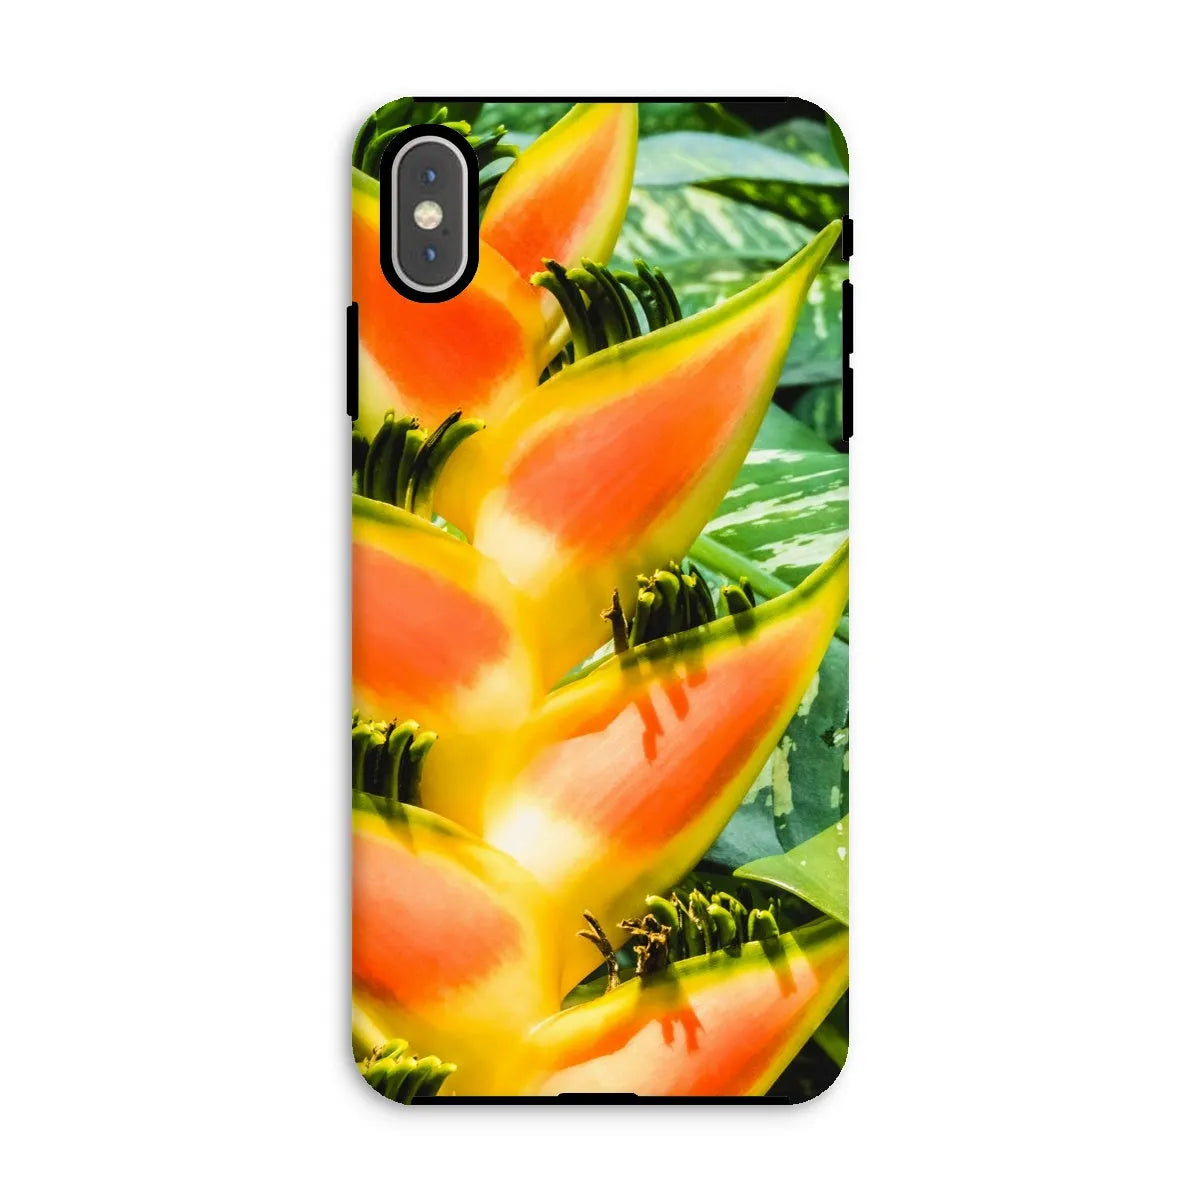 Showstopper Tough Phone Case - Iphone Xs Max / Matte - Mobile Phone Cases - Aesthetic Art